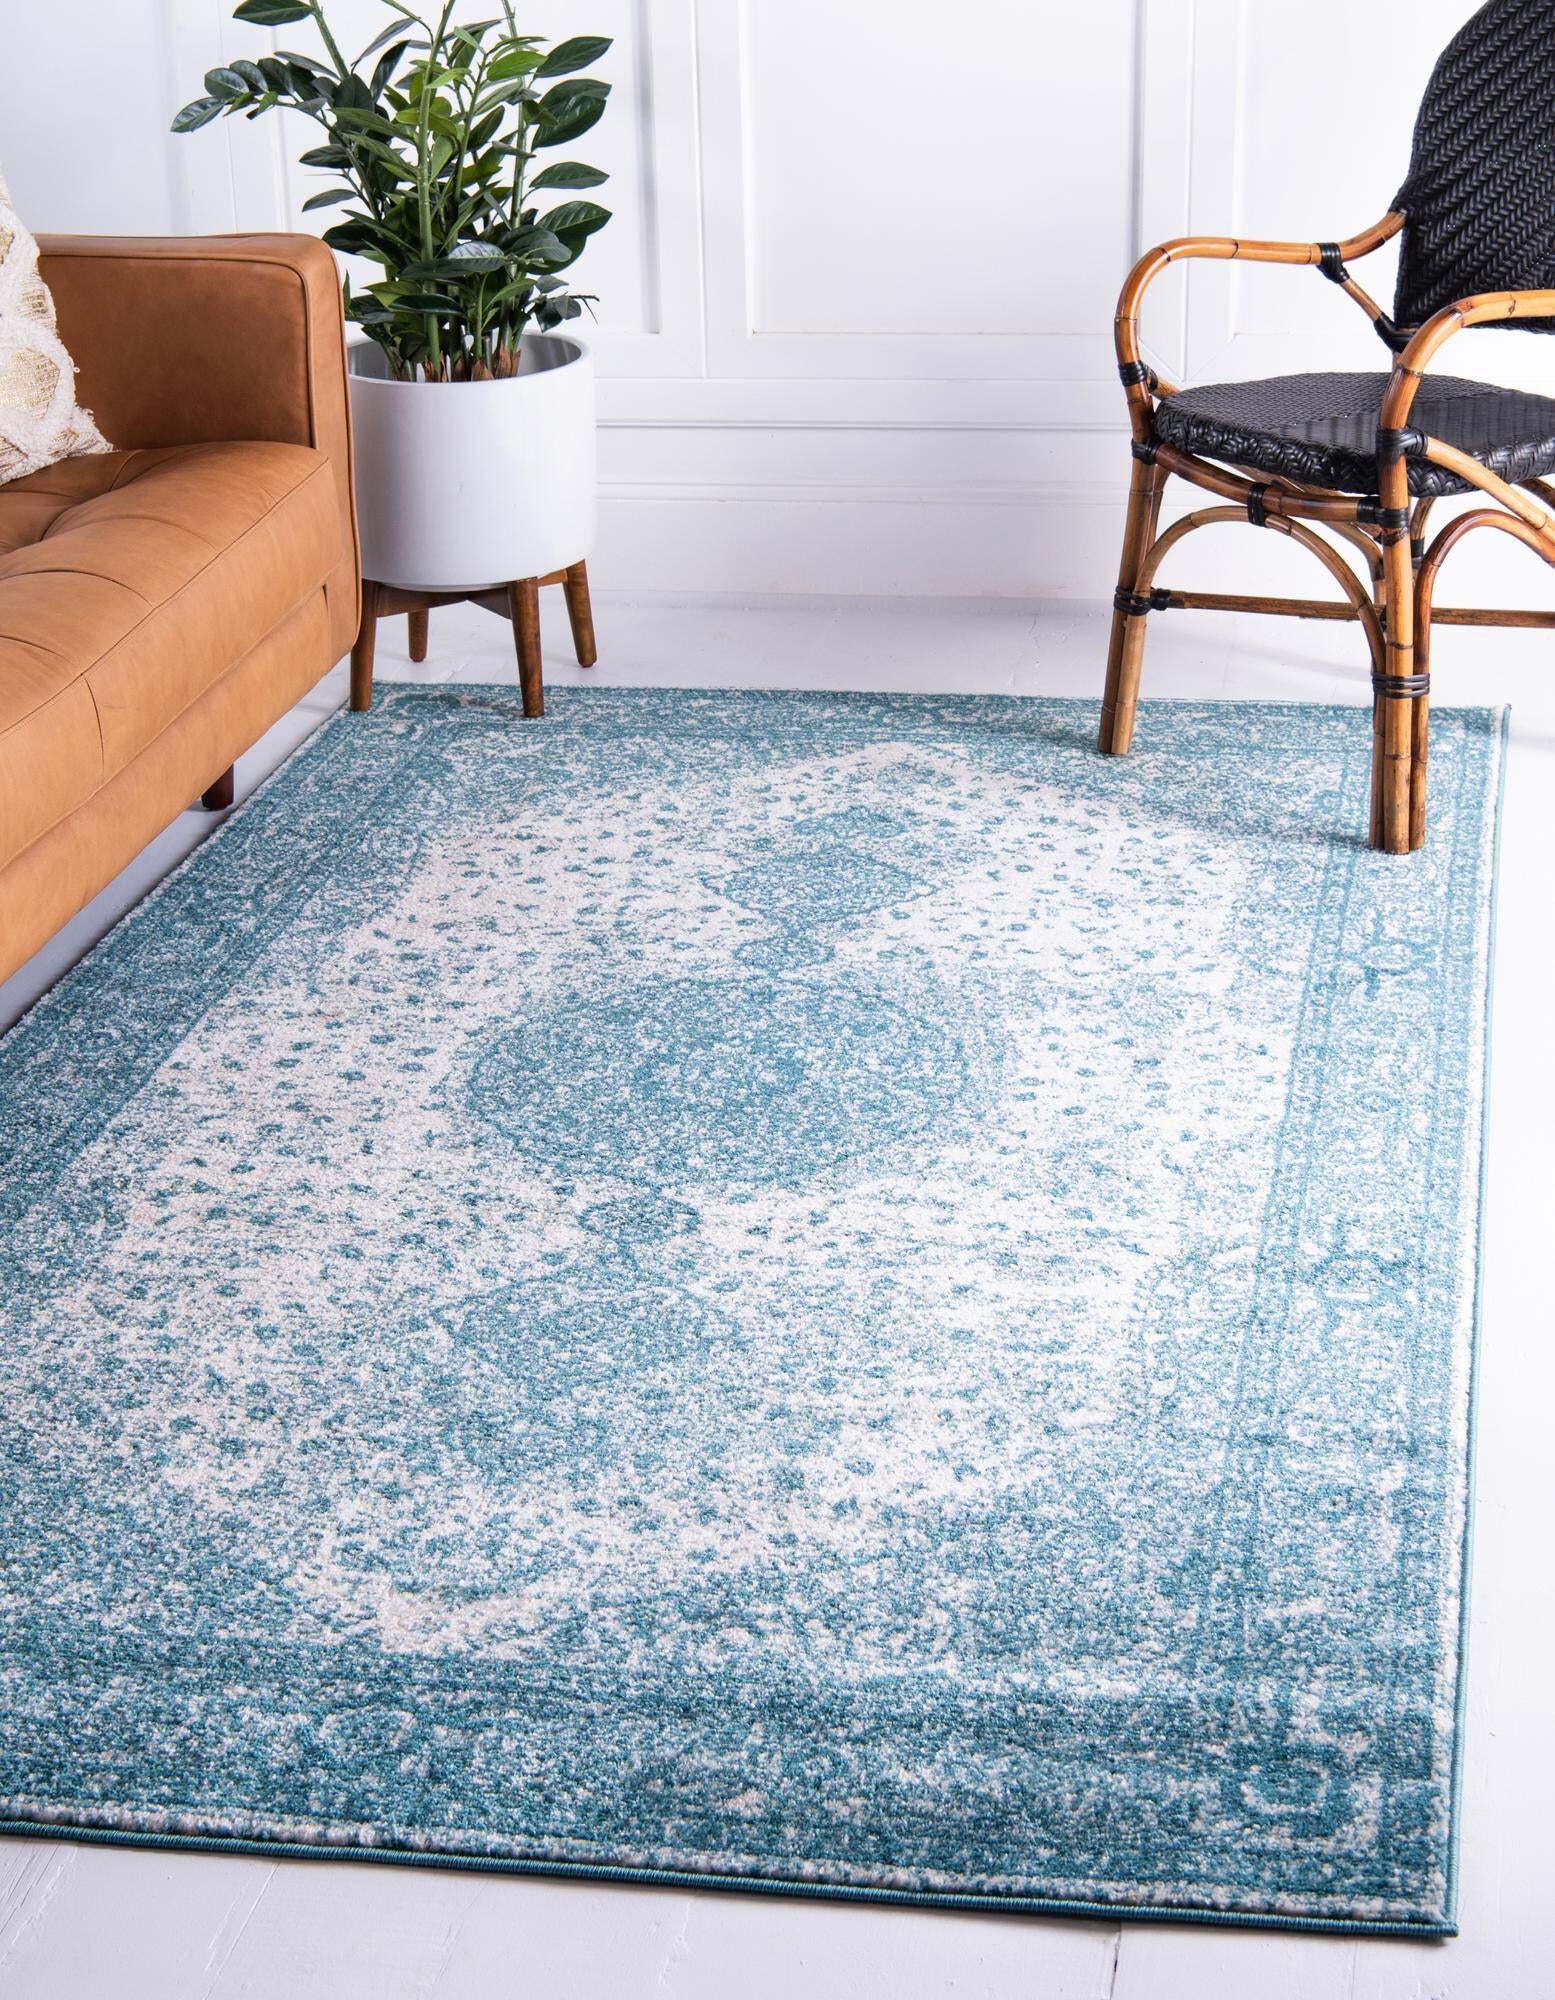 Unique Loom Indoor Rugs - Bromley Medallion Rectangular 8x10 Rug Turquoise & Ivory